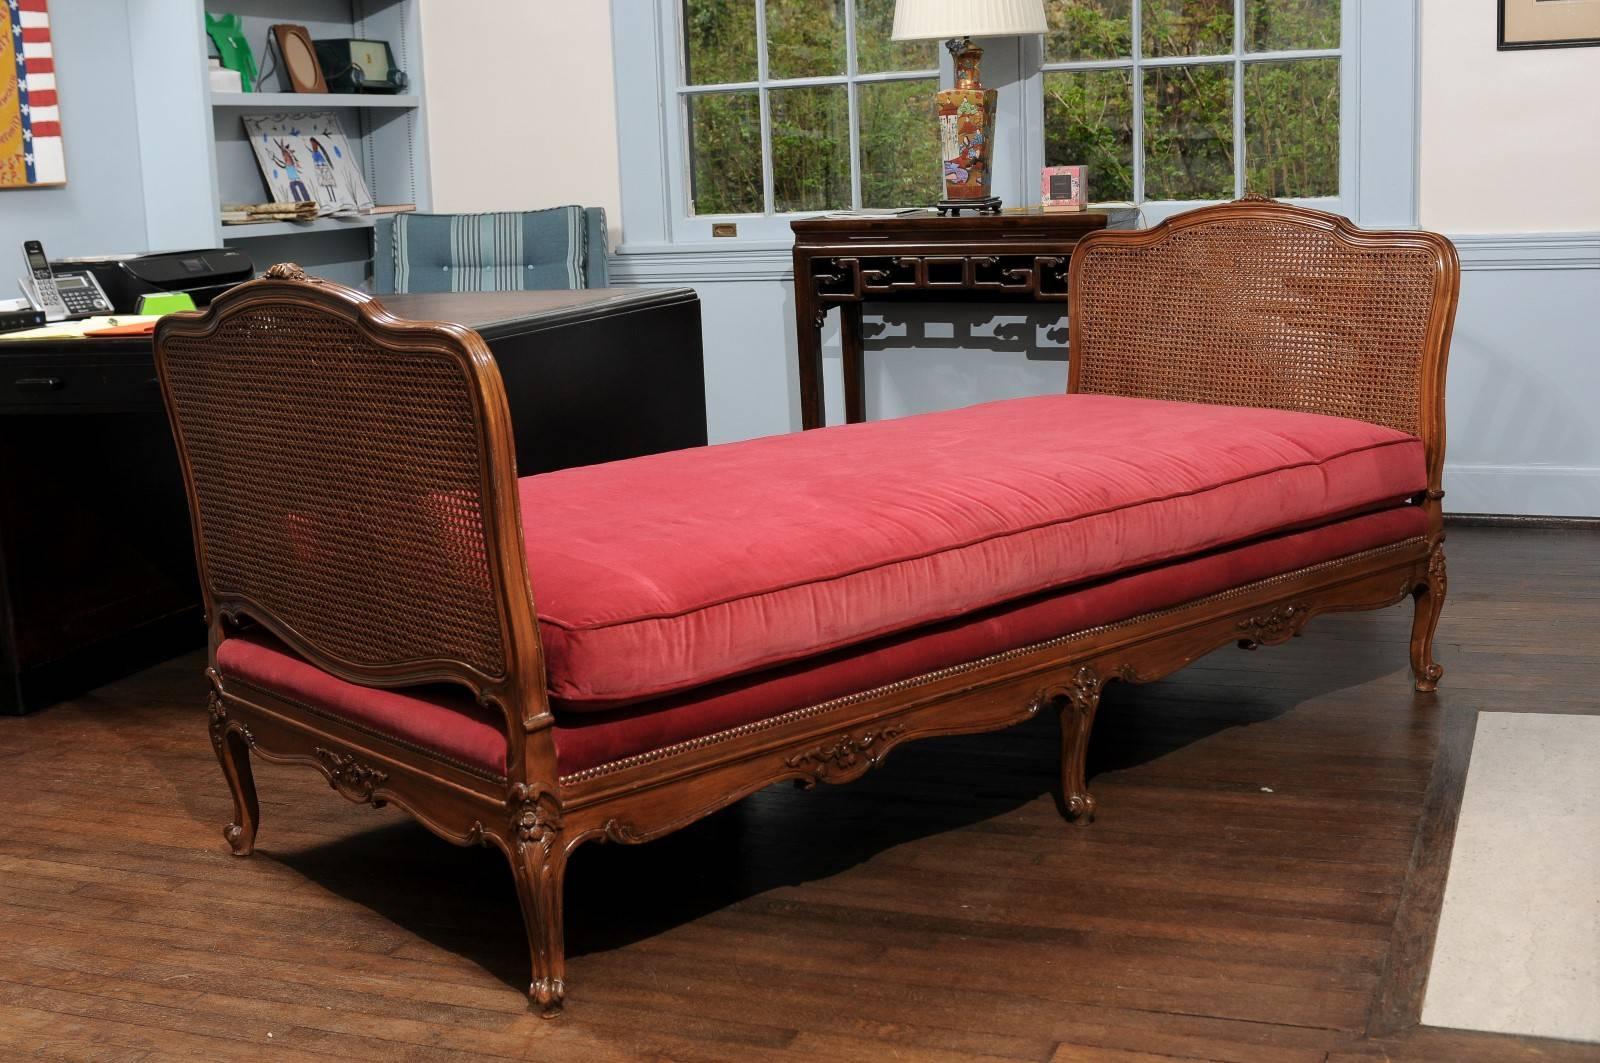 19th Century French Provençal daybed of cane and walnut in the style of Louis XV. The custom red velvet cushion rests on a platform with six carved cabriole legs joined buy floral carved and scalloped aprons and bordered by decorative nailheads. The